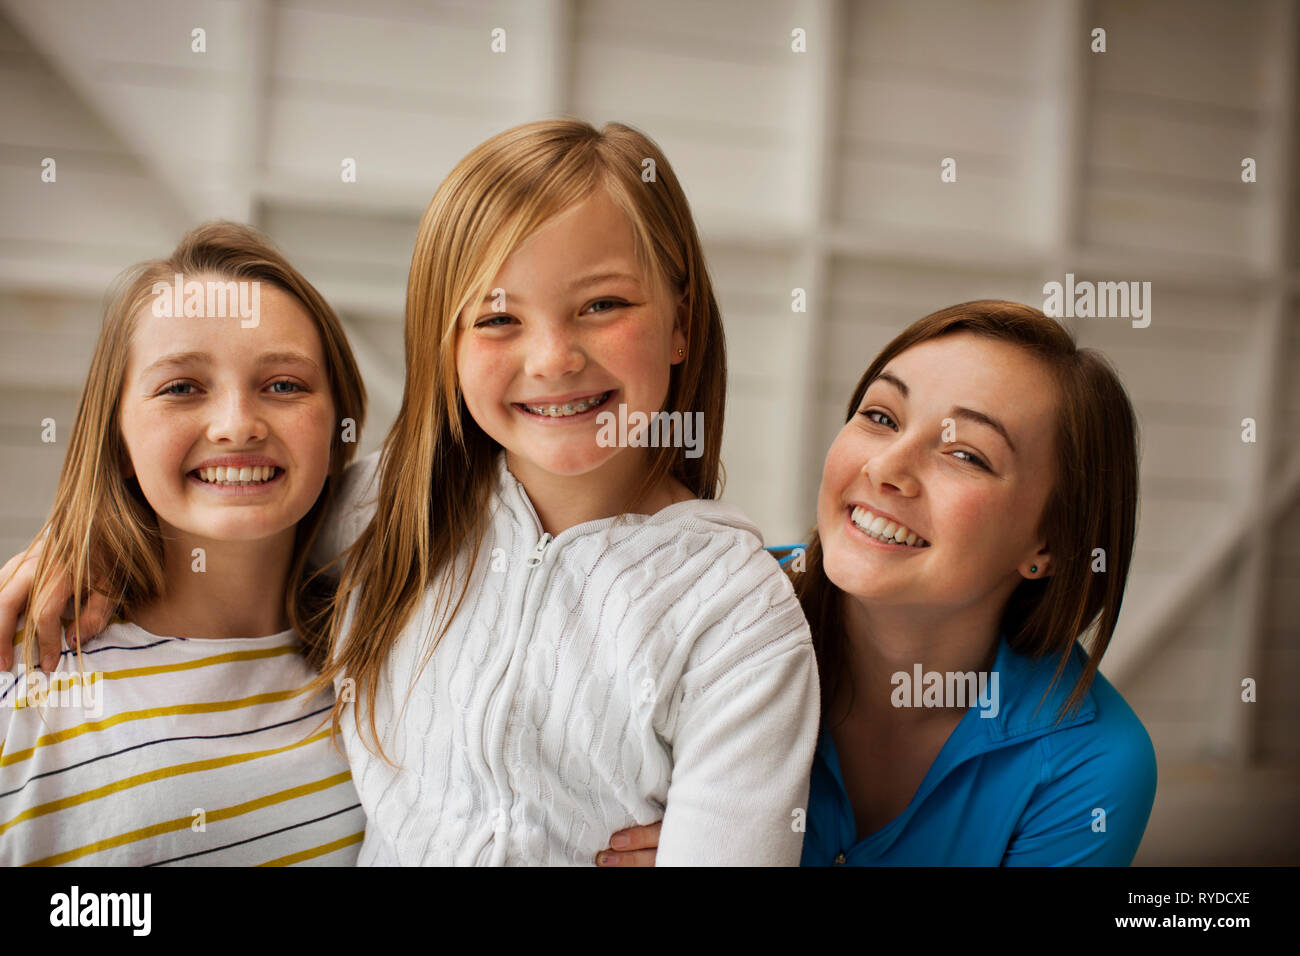 Portrait of three smiling sisters. Stock Photo